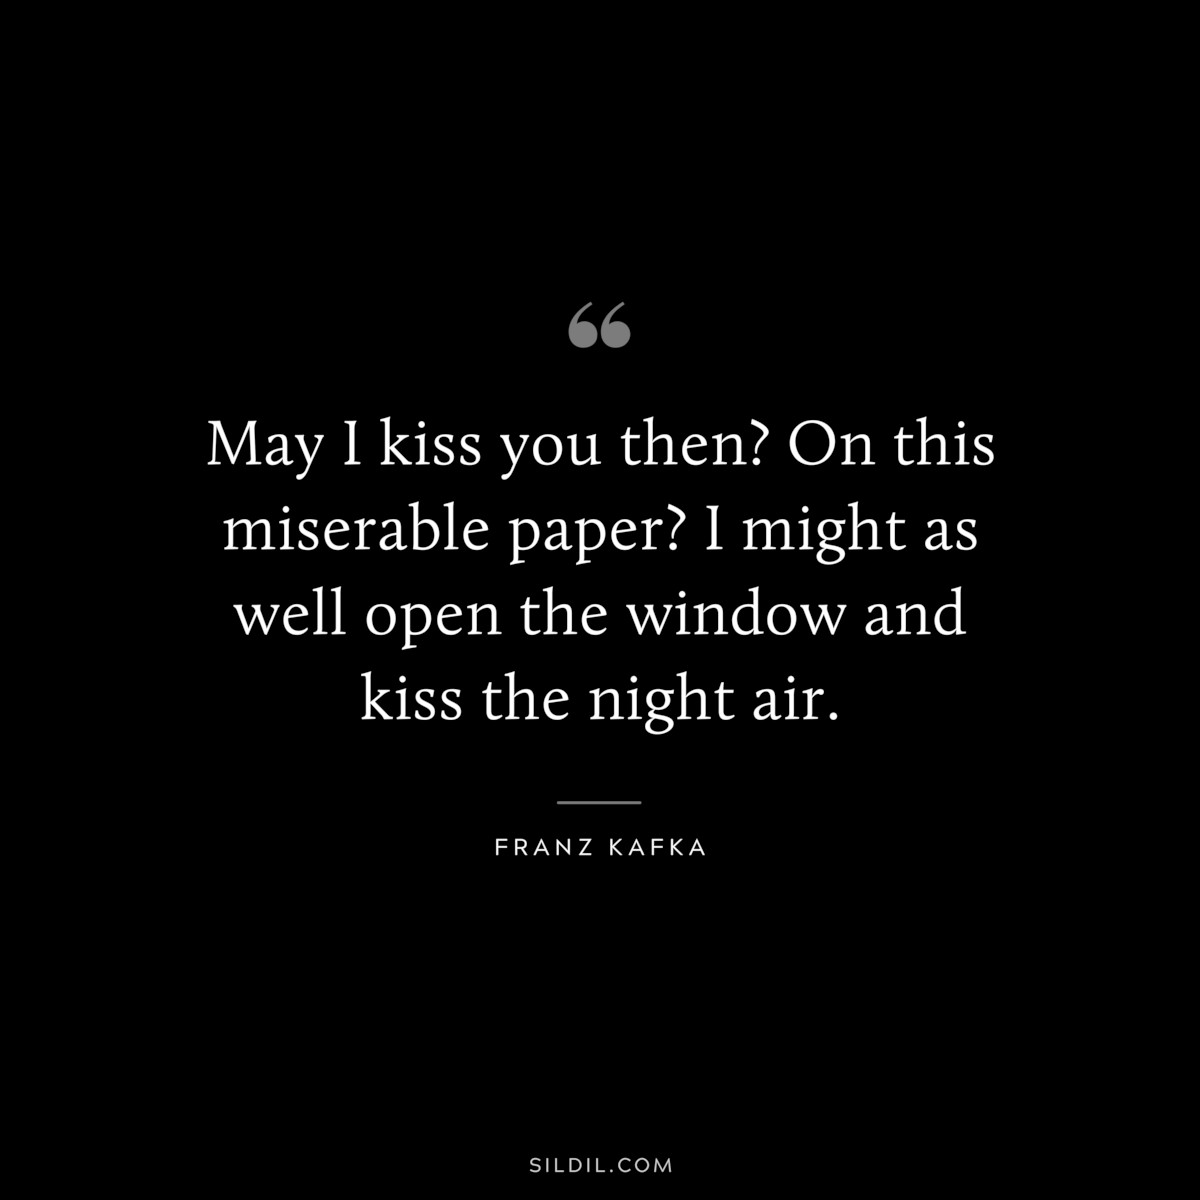 May I kiss you then? On this miserable paper? I might as well open the window and kiss the night air. ― Franz Kafka